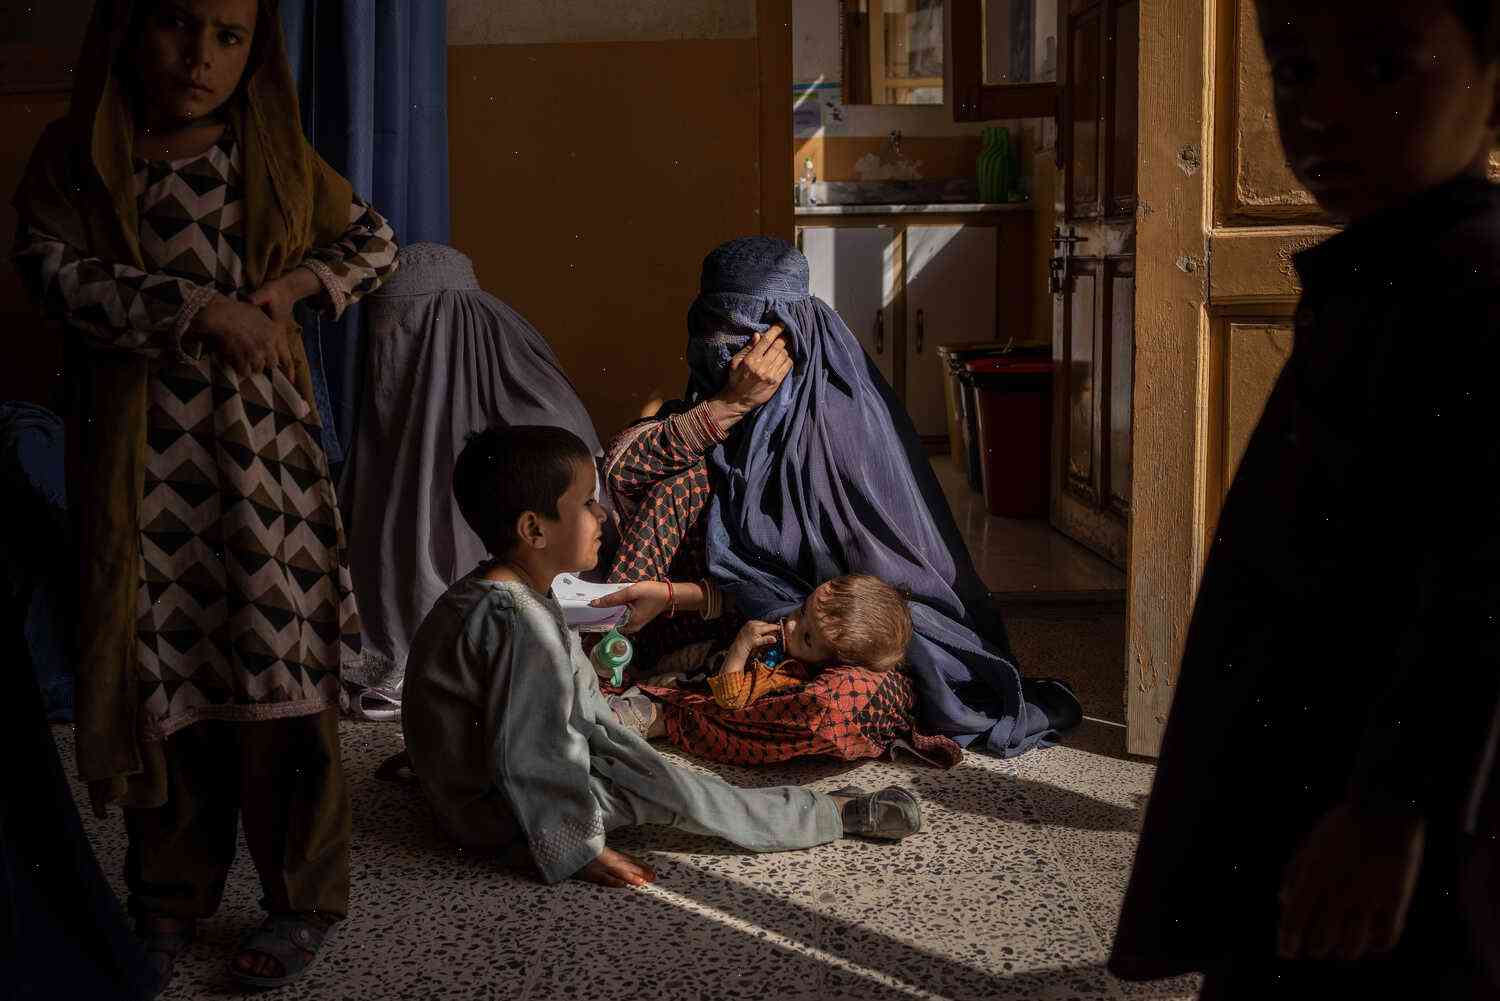 Jehangir Tareen, from Kabul, writes about Afghanistan’s desperately poor people